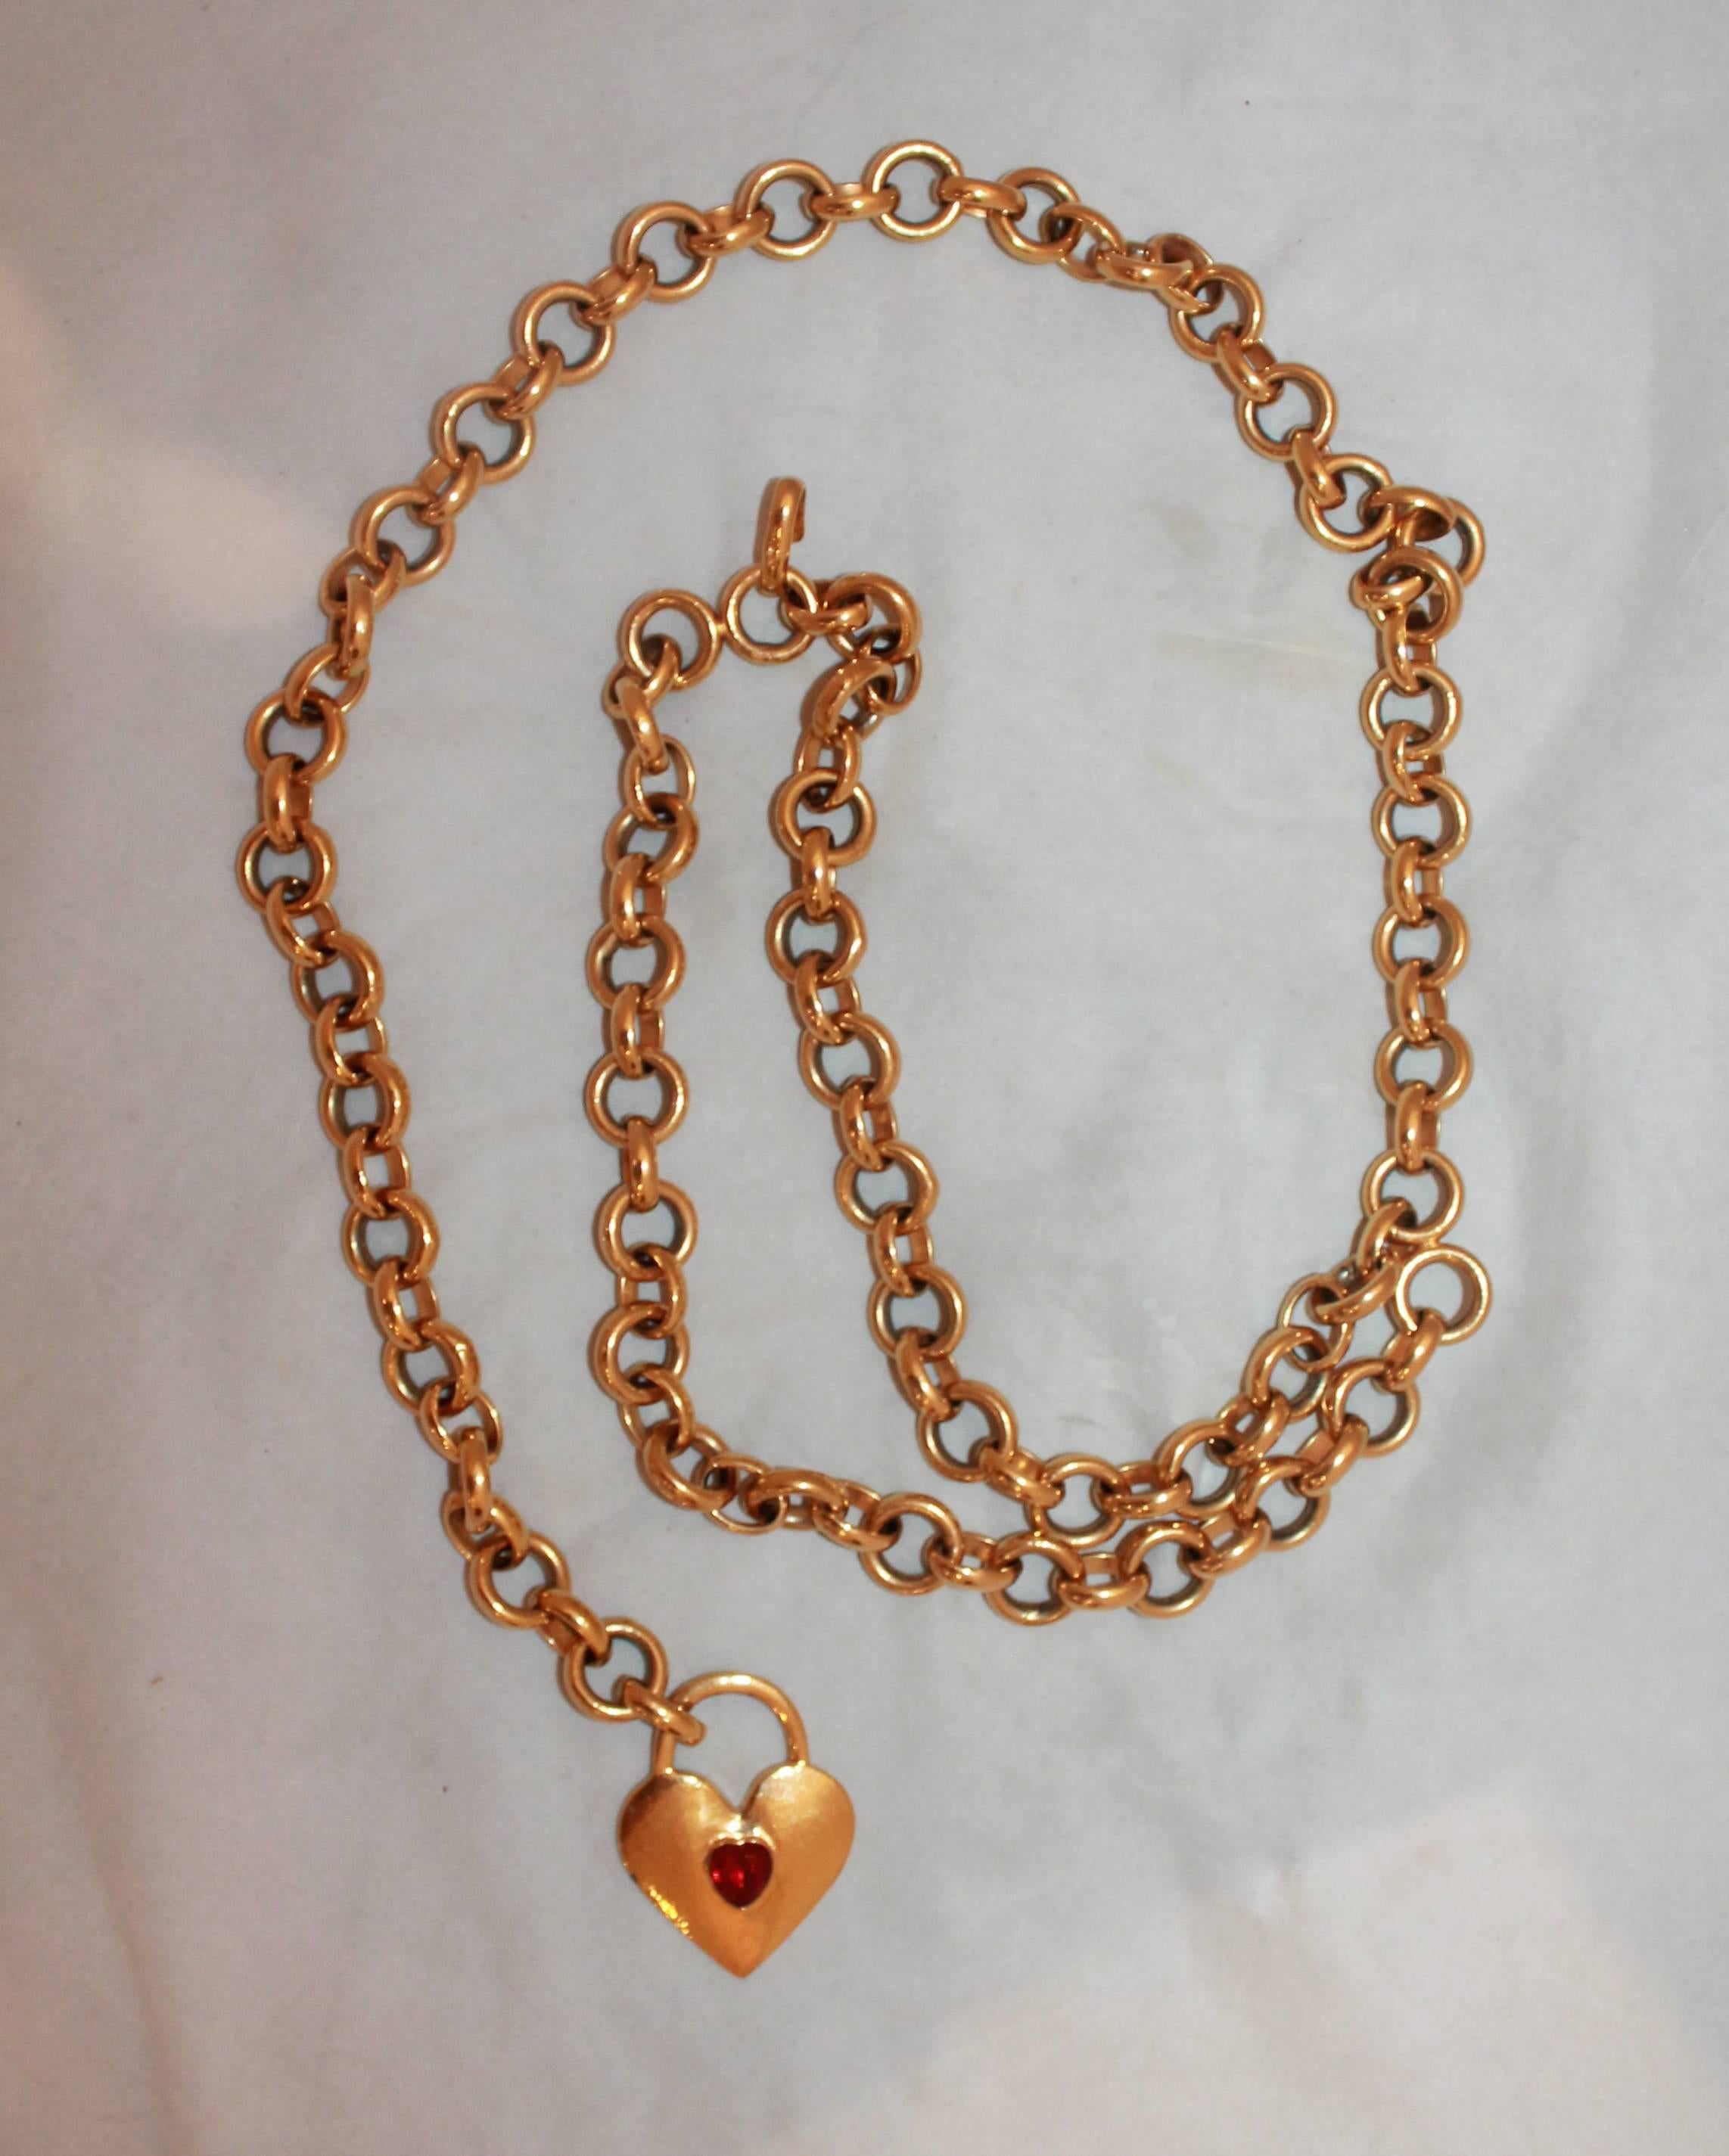 Chanel 1970's Vintage Goldtone Chain Link Belt & Necklace with Heart & Red Rhinestone. This belt is in excellent vintage condition with minor wear consistent with age, mainly an area of the back of the heart has some paint on the edges coming off as